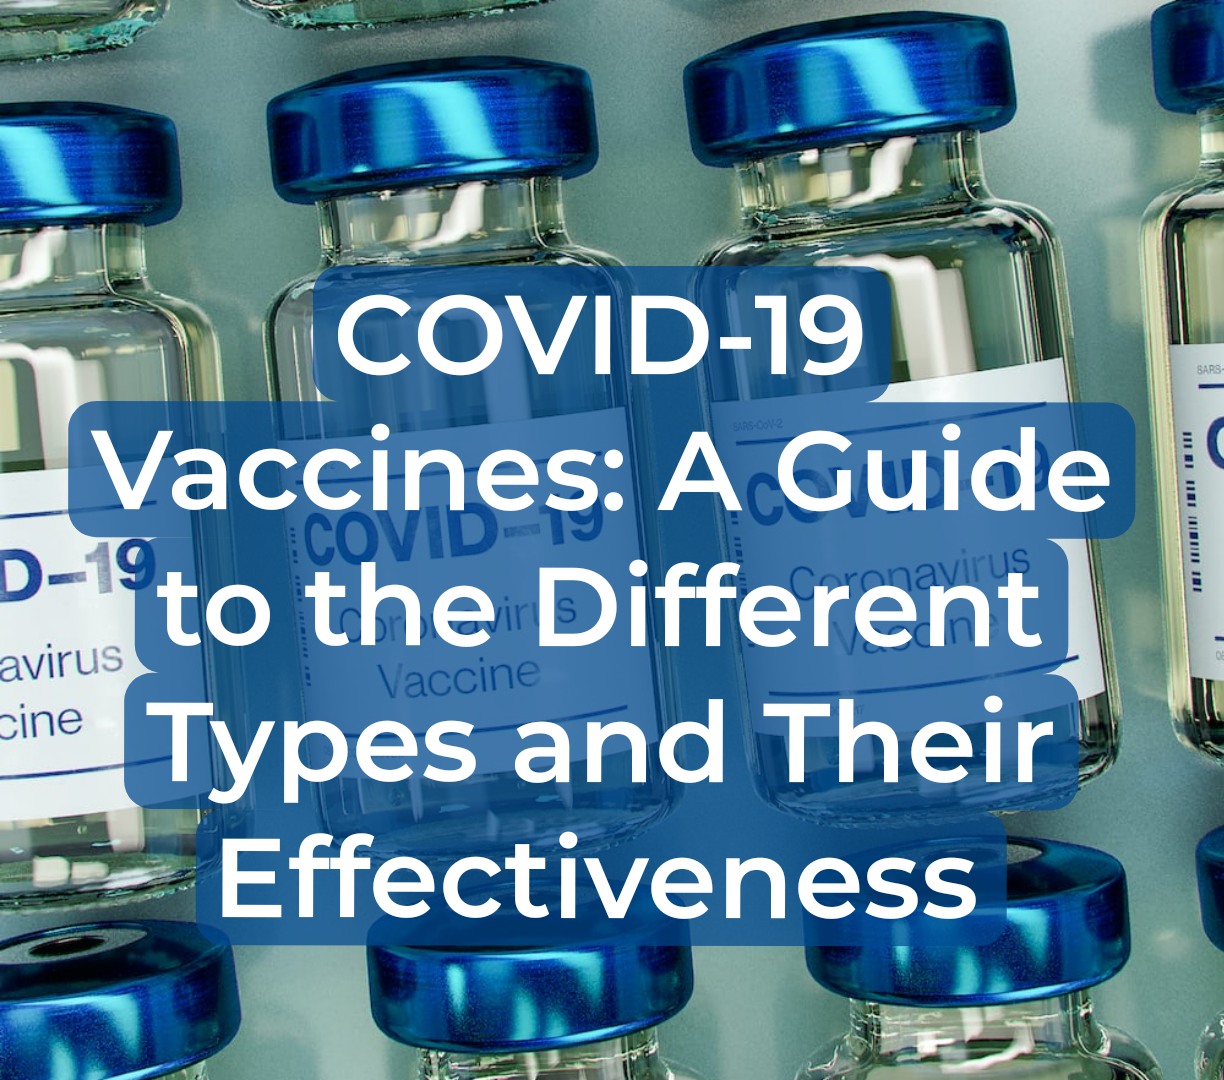 COVID-19 Vaccines: A Guide to the Different Types and Their Effectiveness